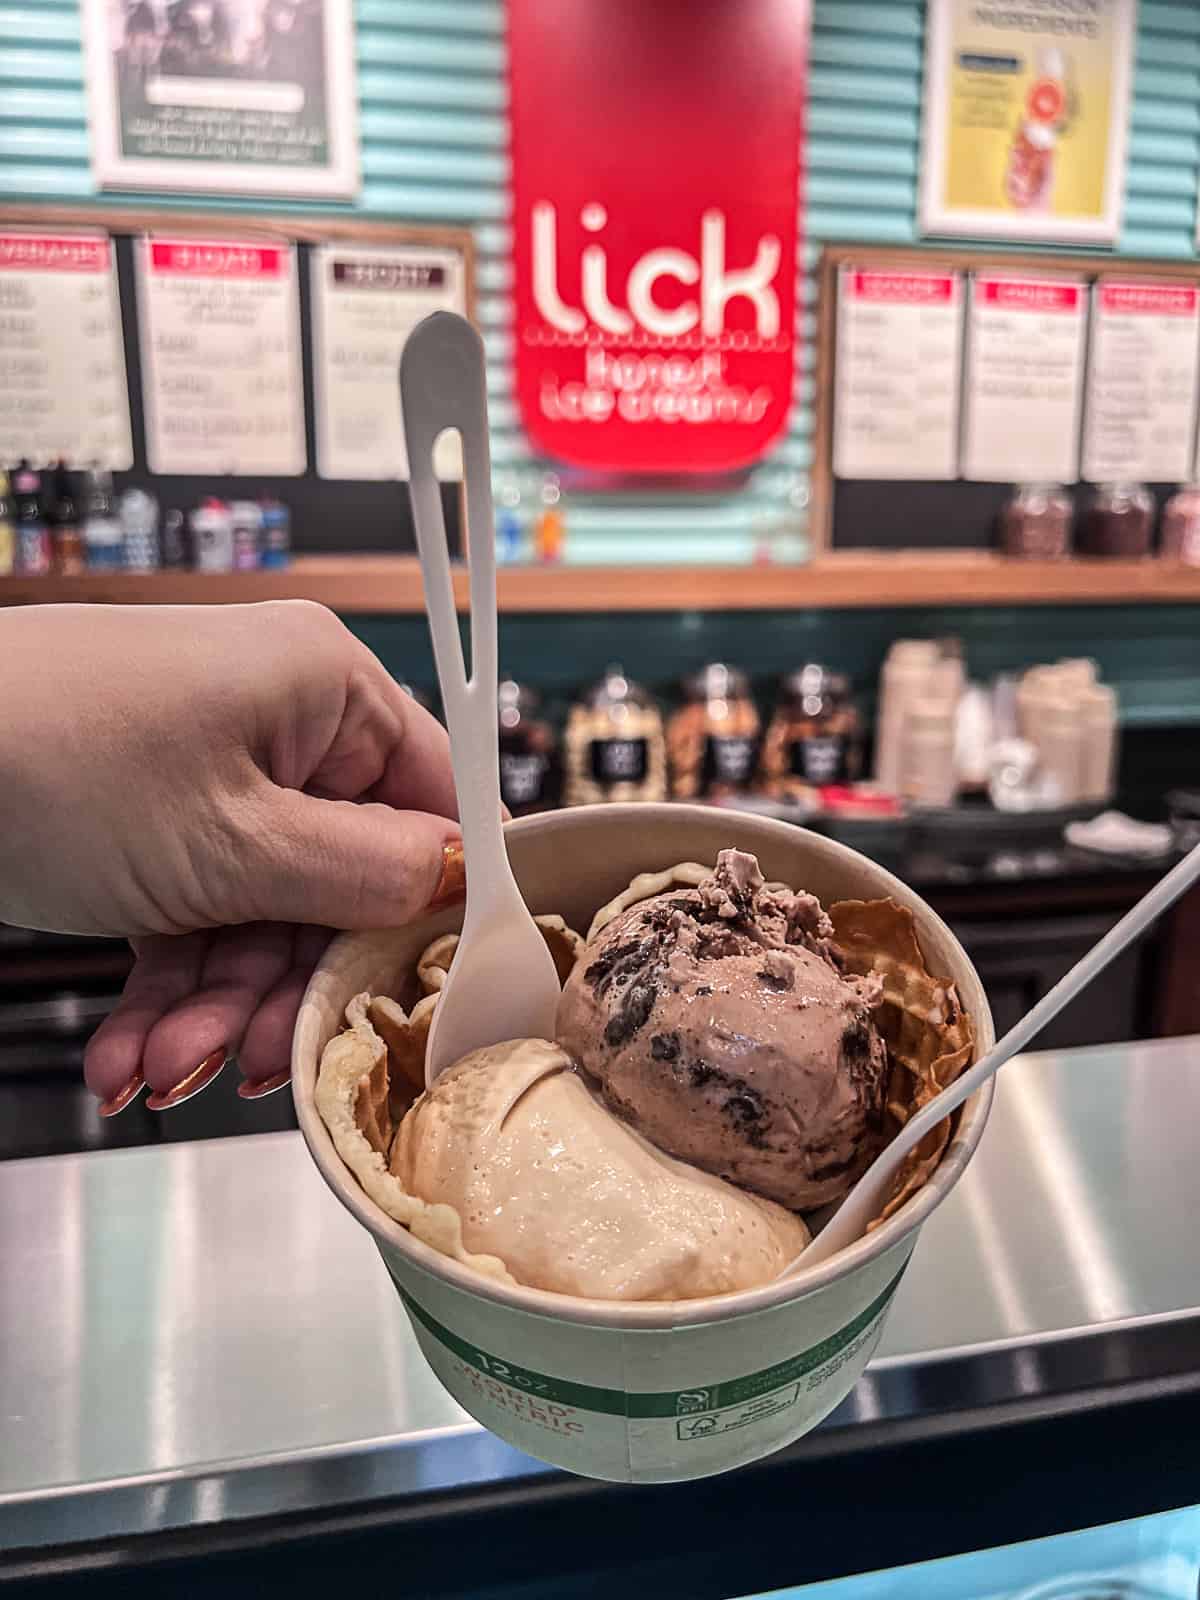 Getting food at Lick Ice Cream in Austin Texas